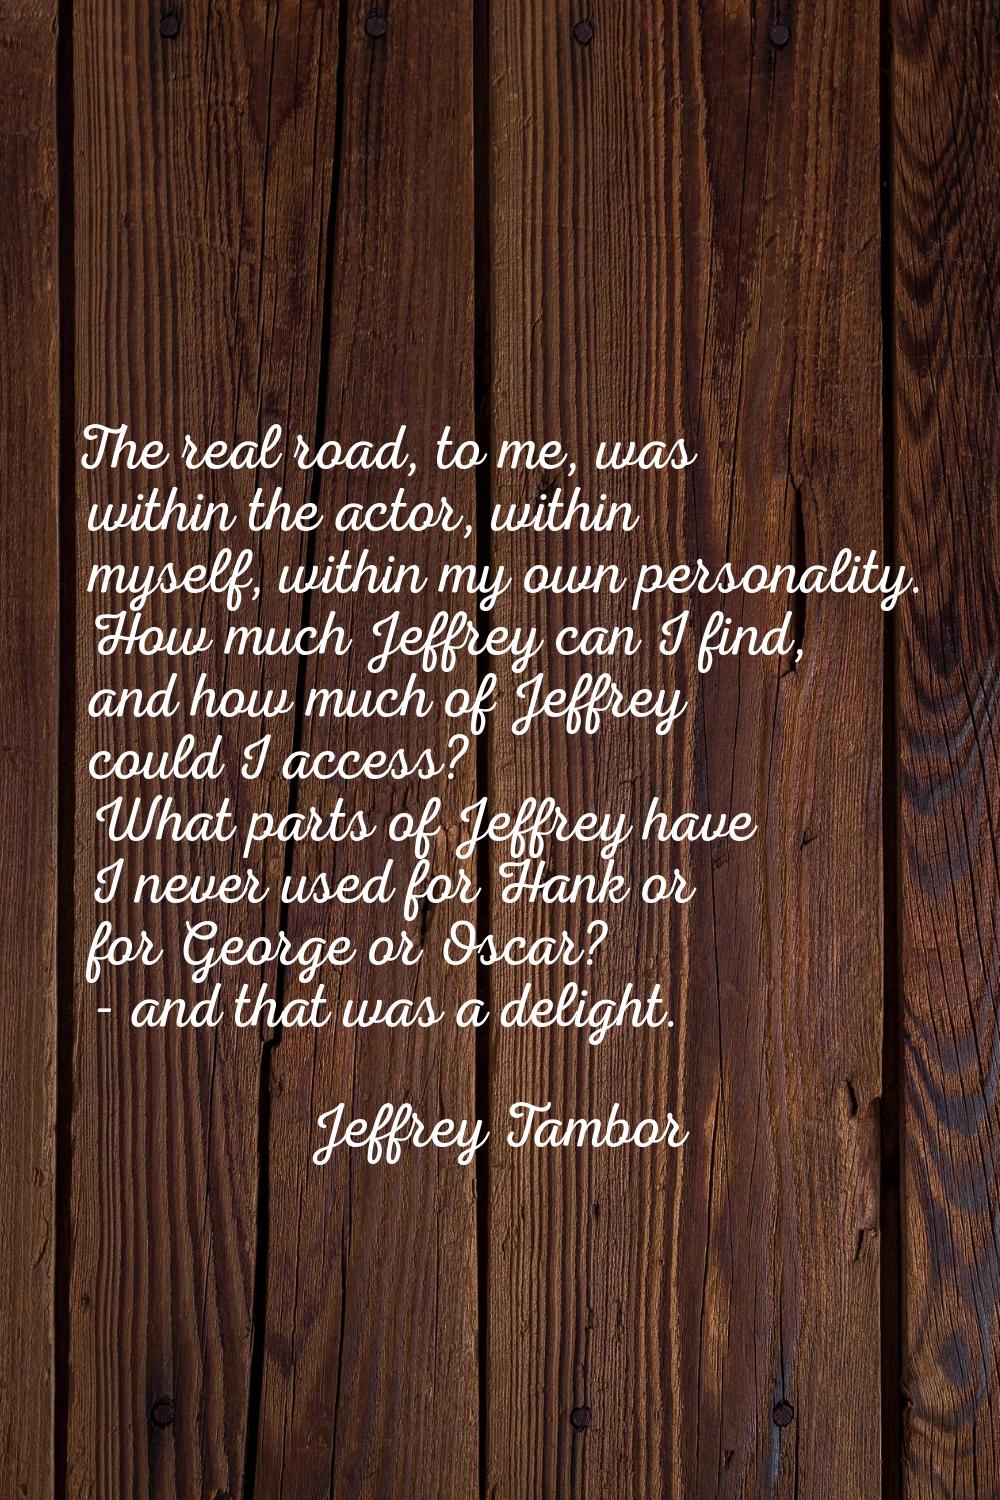 The real road, to me, was within the actor, within myself, within my own personality. How much Jeff